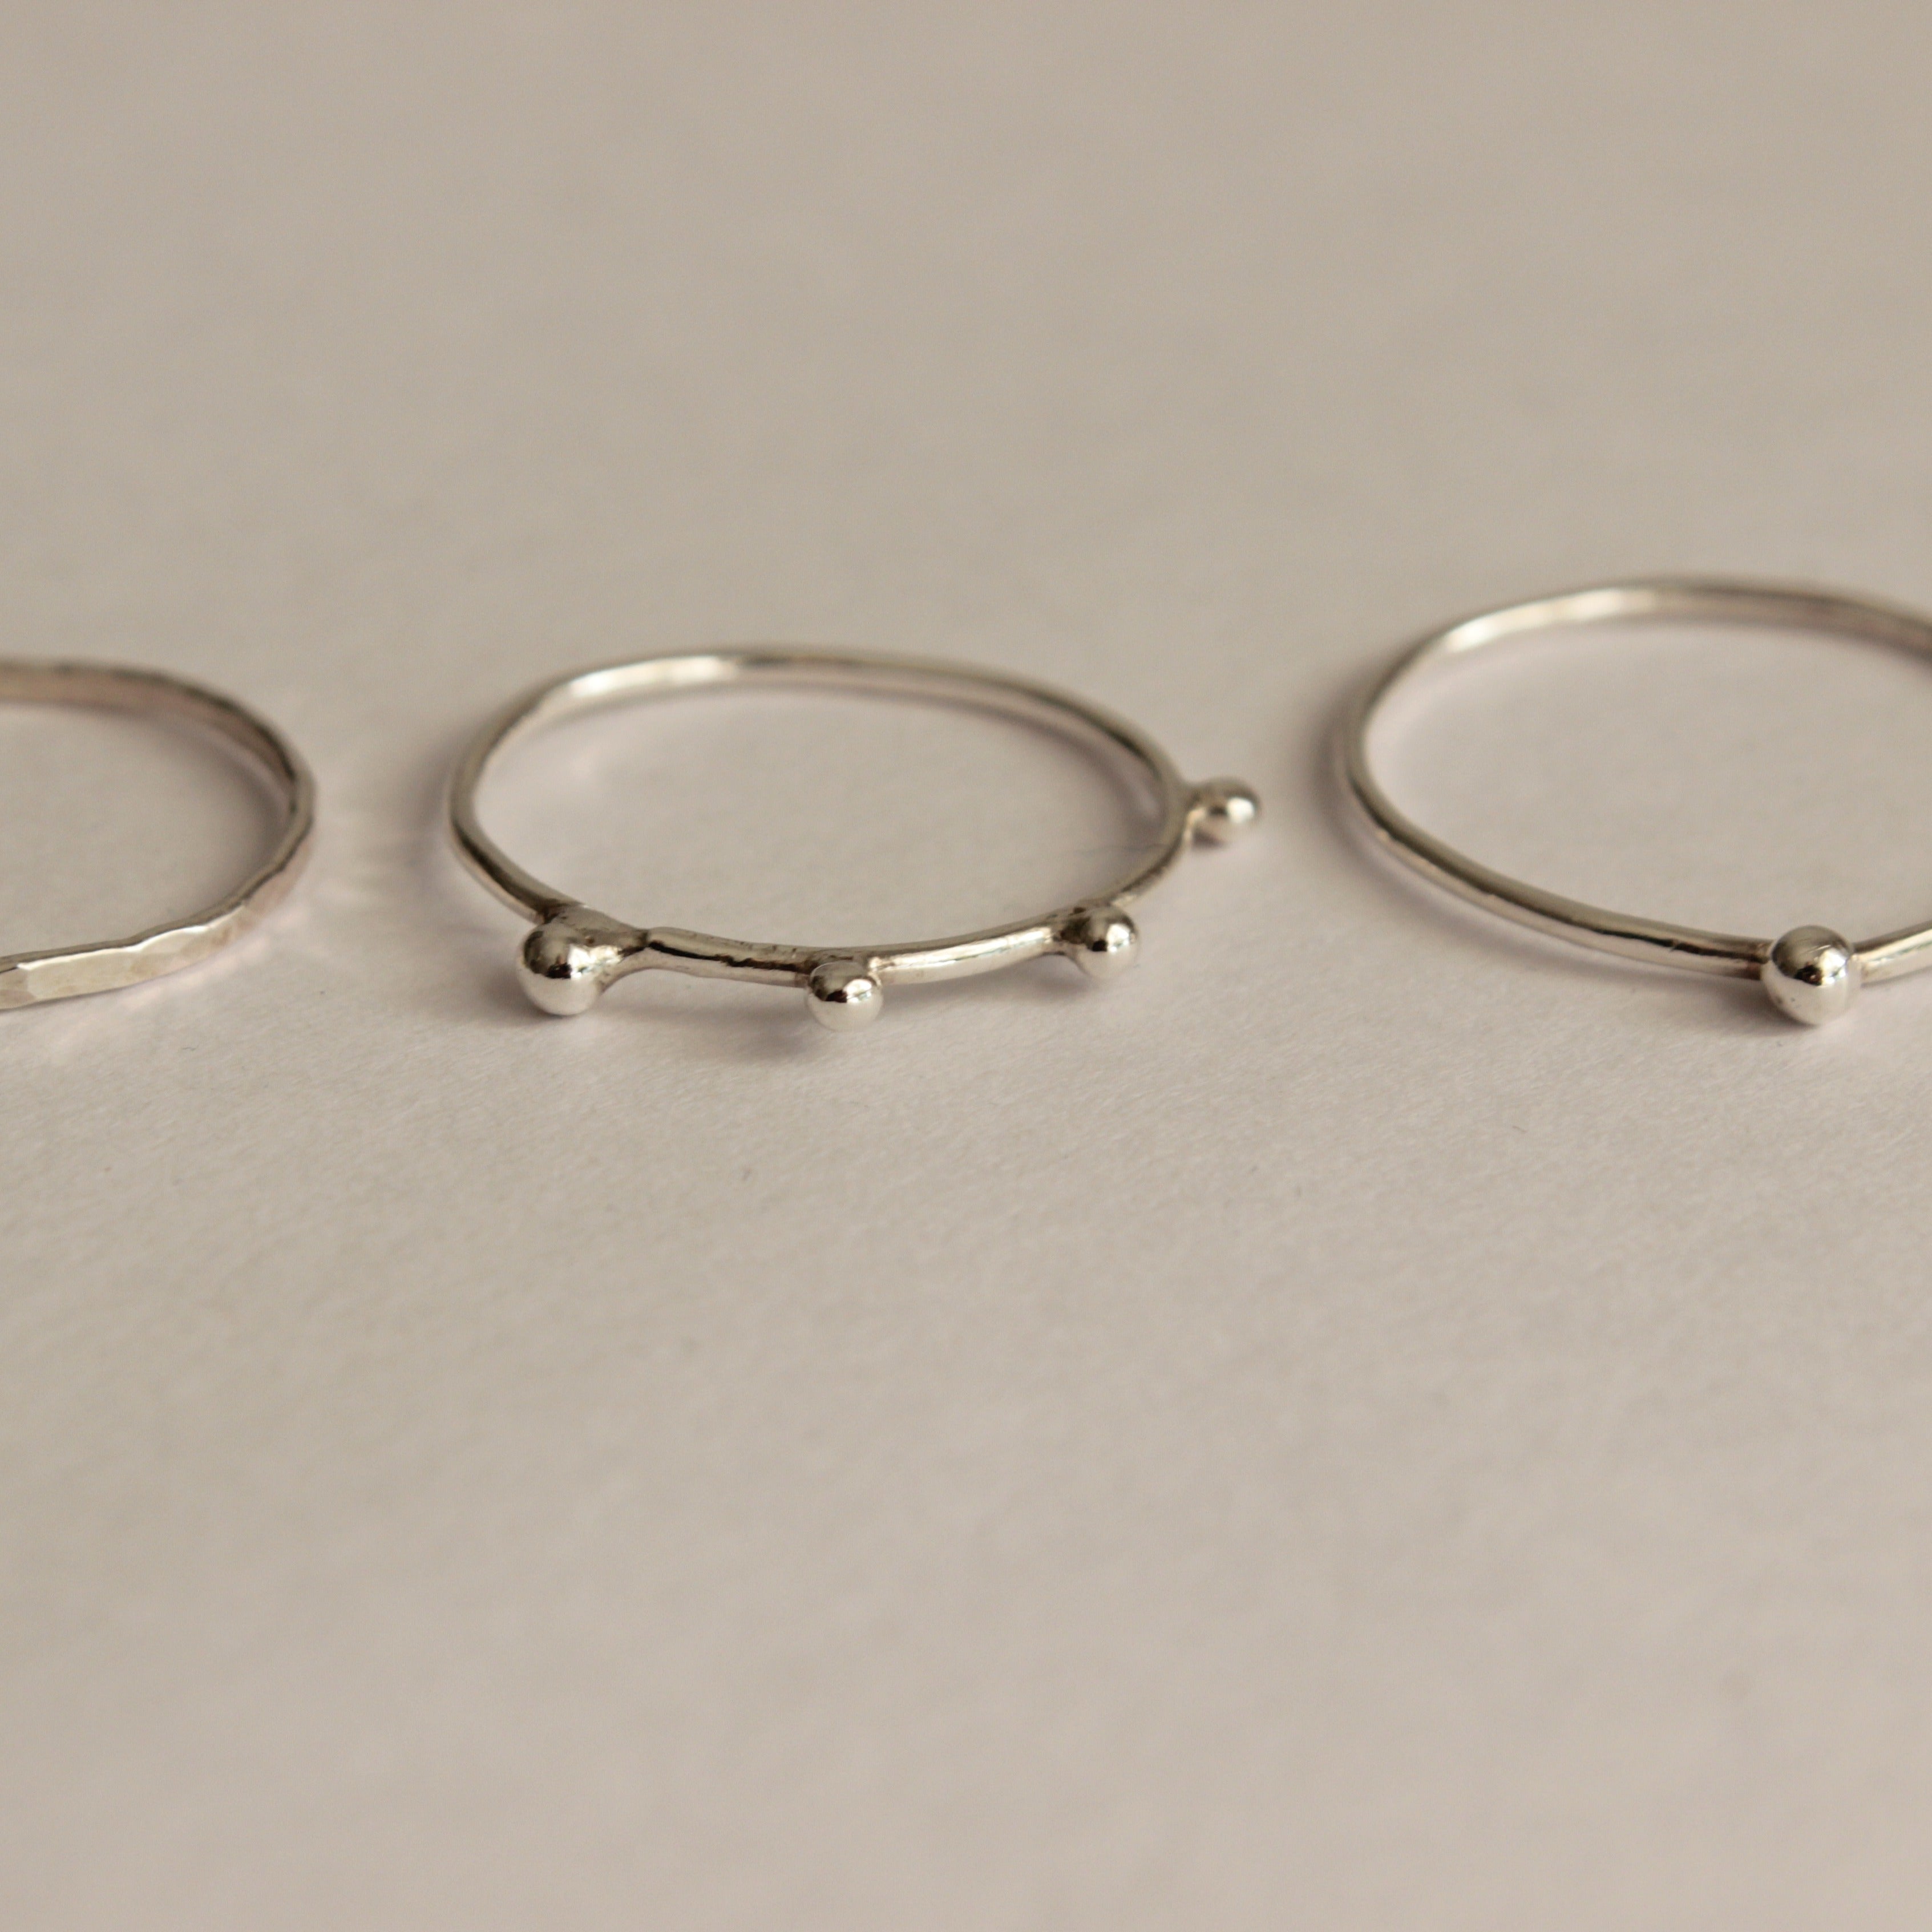 The delicate sterling silver stacking rings by Bournemouth based, Josie Mitchell Jewellery. Wear the stacker rings individually, or mix and match to create your own unique style. Hand crafted using recycled sterling silver for a timeless addition to your jewellery collection.